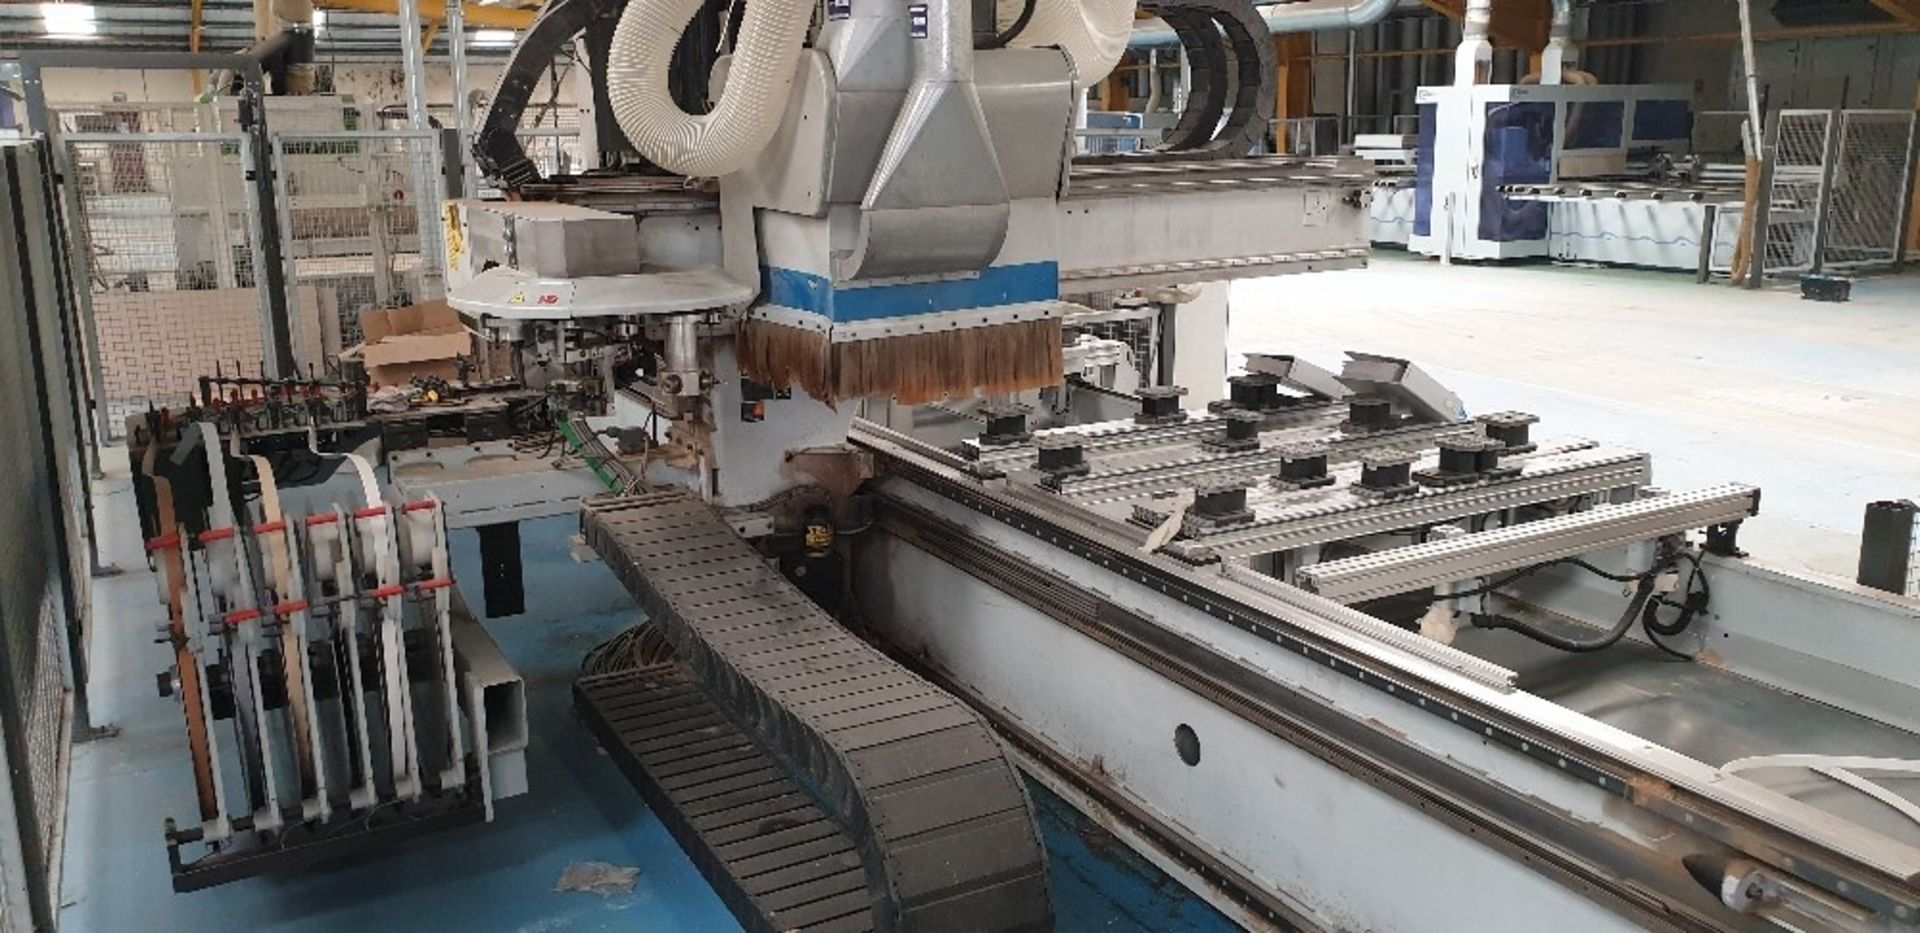 Homag Optimat BAZ 322/40/K CNC machining centre. Serial No. 0-201-15-2884. Year of Manufacture 2004. - Image 6 of 9